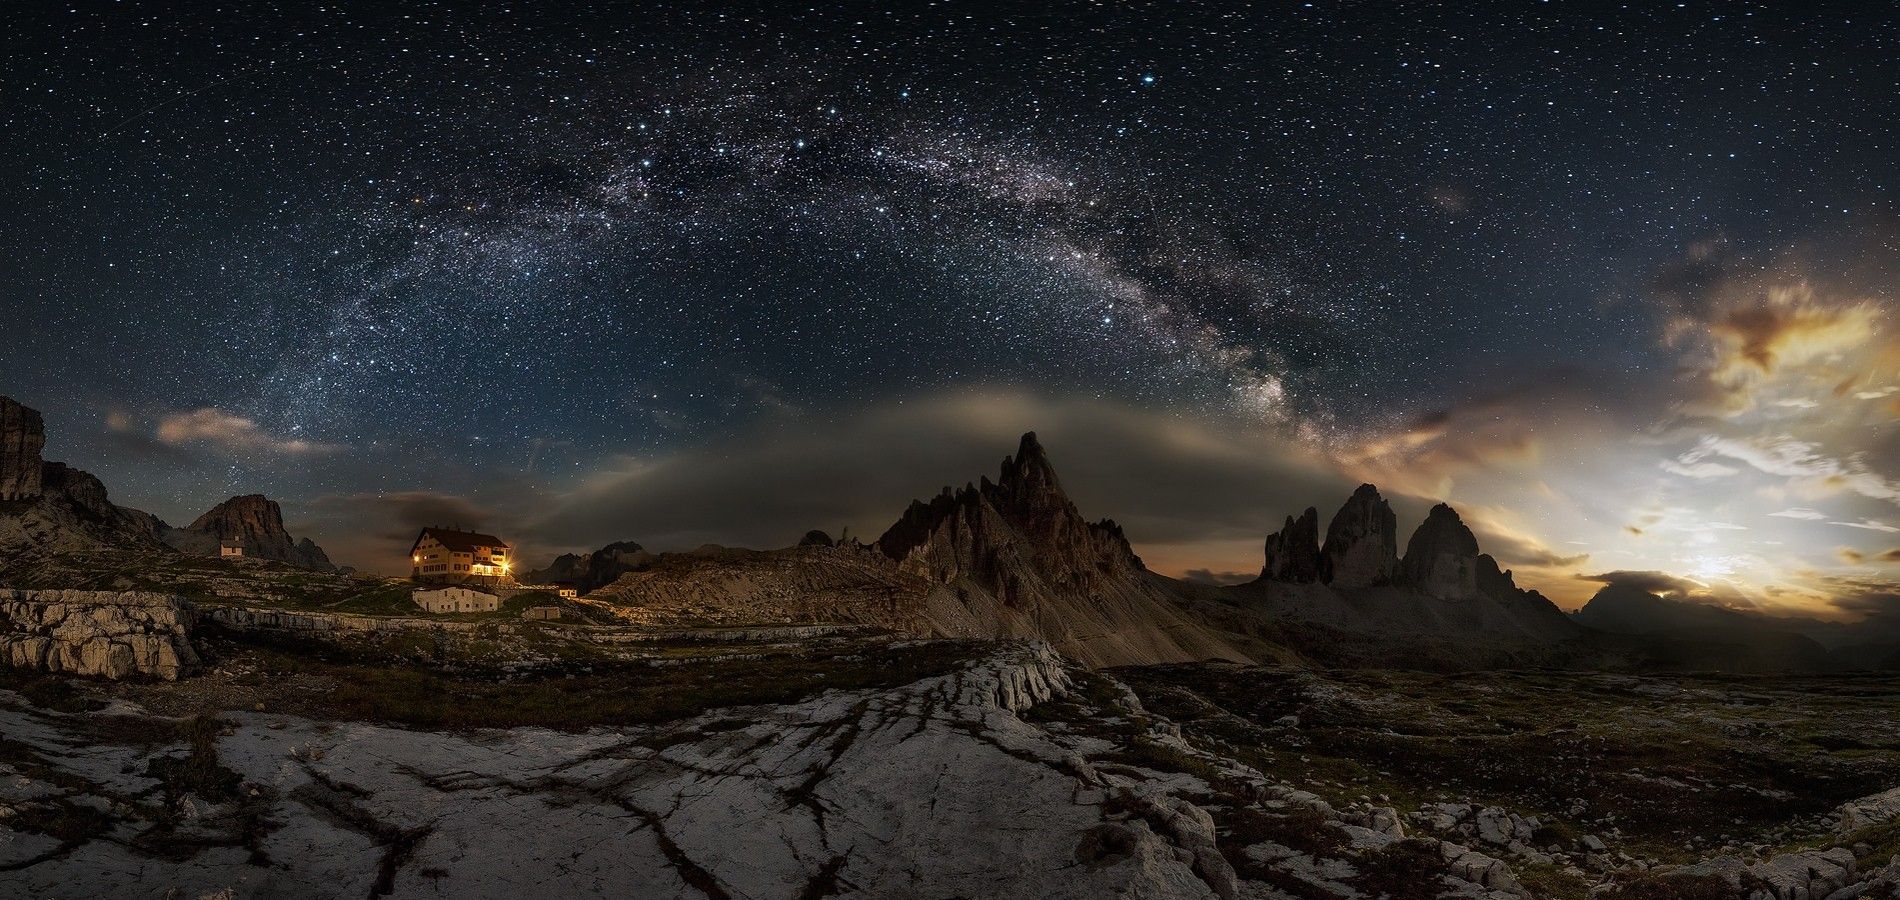 #panoramas, #landscape, #nature, #cabin, #Milky Way, #Italy, #photography, #building, #Dolomites (mountains), #long exposure, #starry night, #galaxy, #summer